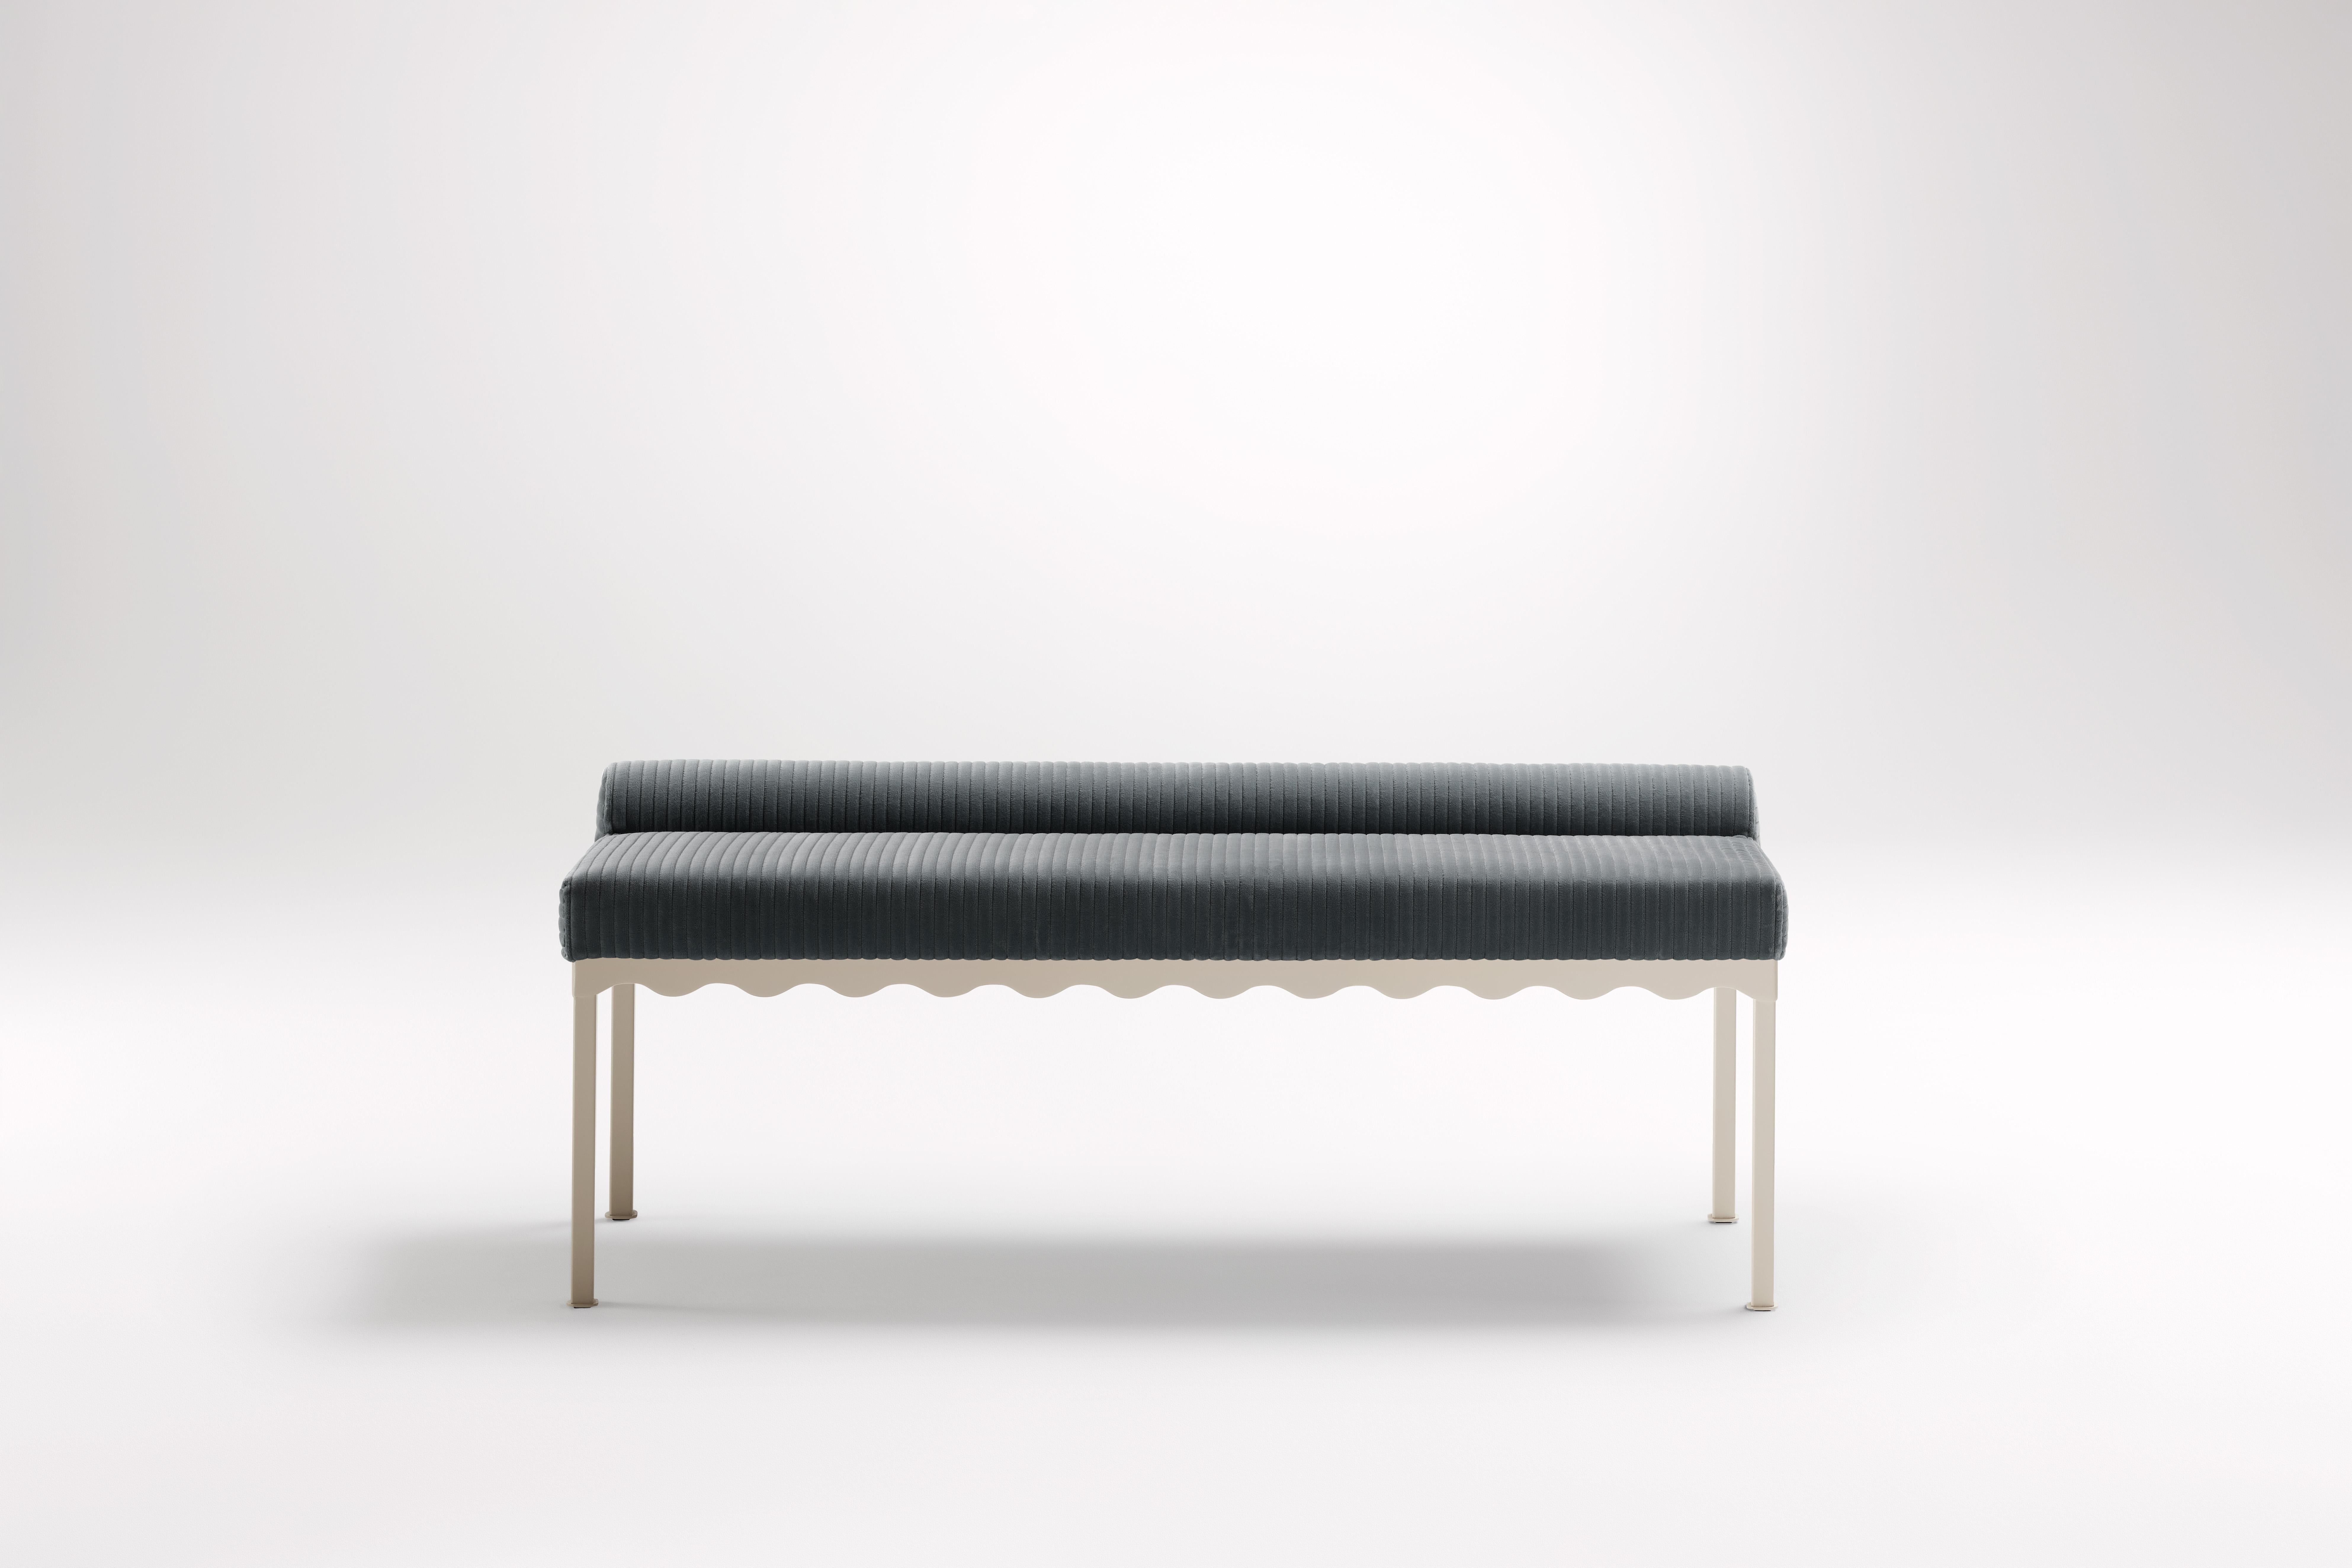 Marmoset Bellini 1340 Bench by Coco Flip
Dimensions: D 134 x W 54 x H 52.5 cm
Materials: Timber / Upholstered tops, Powder-coated steel frame. 
Weight: 20 kg
Frame Finishes: Textura Paperbark.

Coco Flip is a Melbourne based furniture and lighting